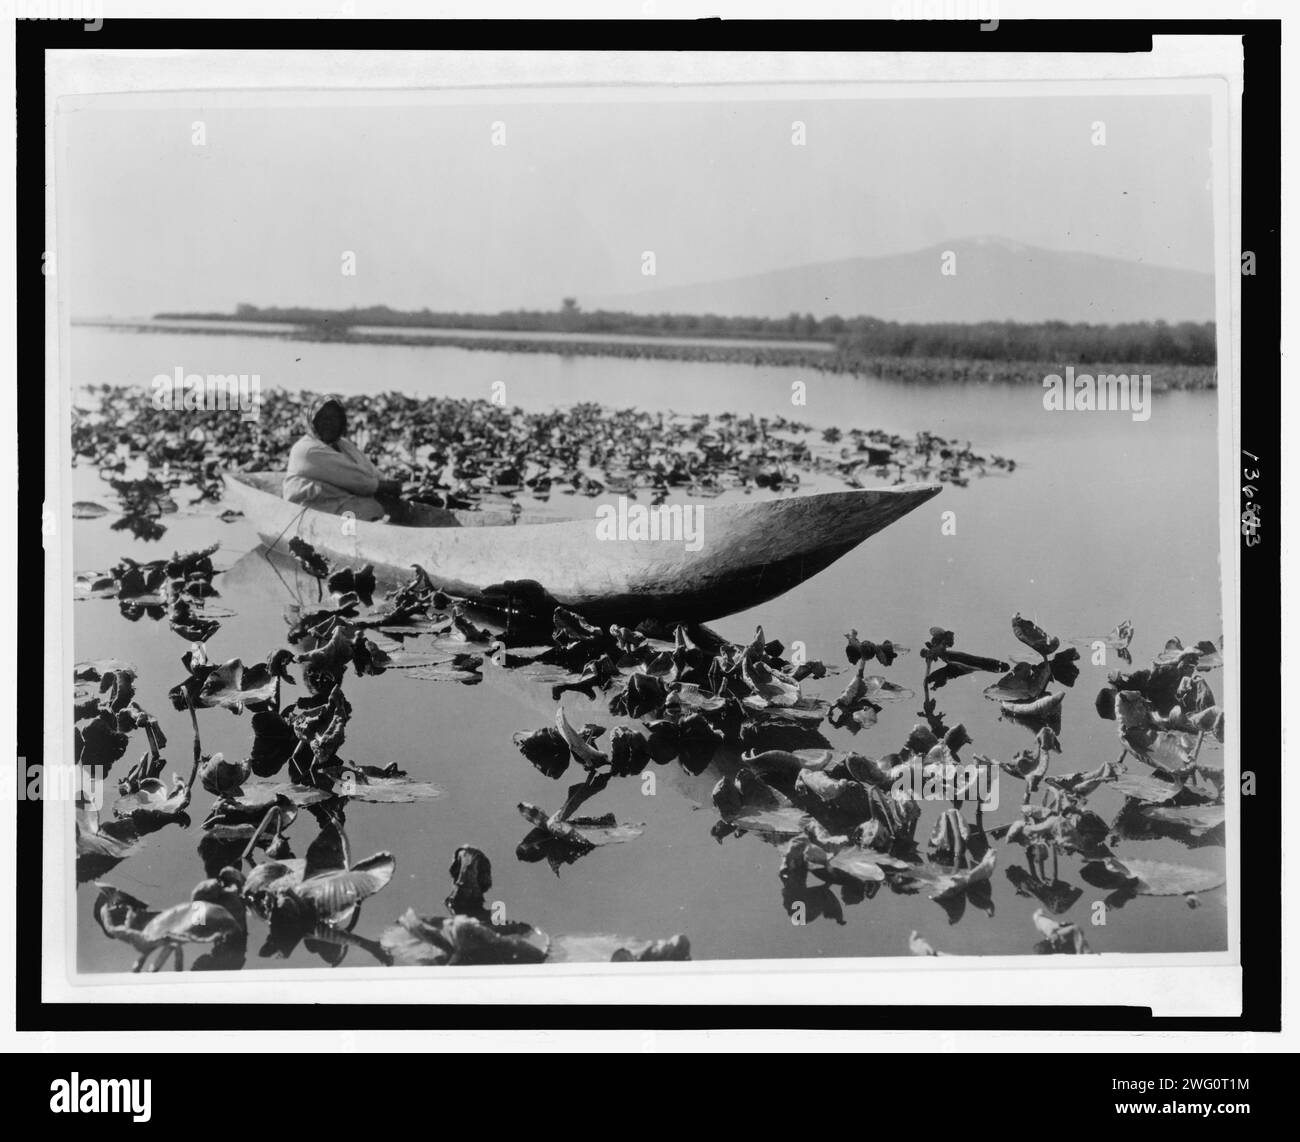 The wokas season-Klamath, c1923. Photograph shows a Klamath woman in a dugout canoe resting in a field of wokas, or great yellow water lilies (nymphaea polysepala) used as food, probably in the Klamath Basin area of Oregon. Stock Photo